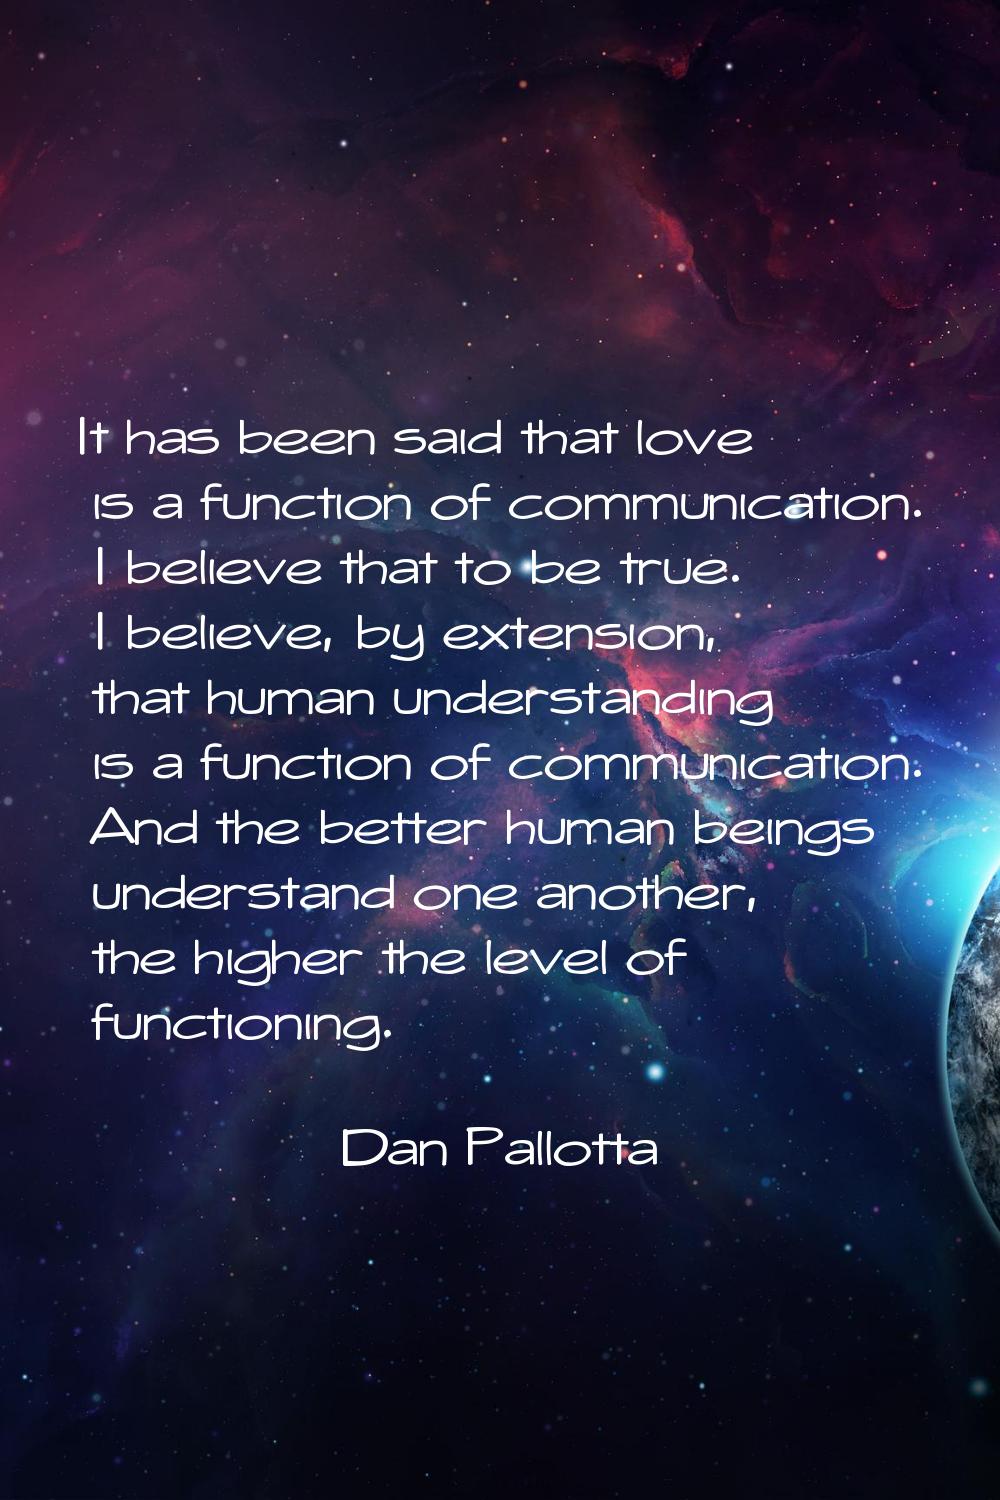 It has been said that love is a function of communication. I believe that to be true. I believe, by